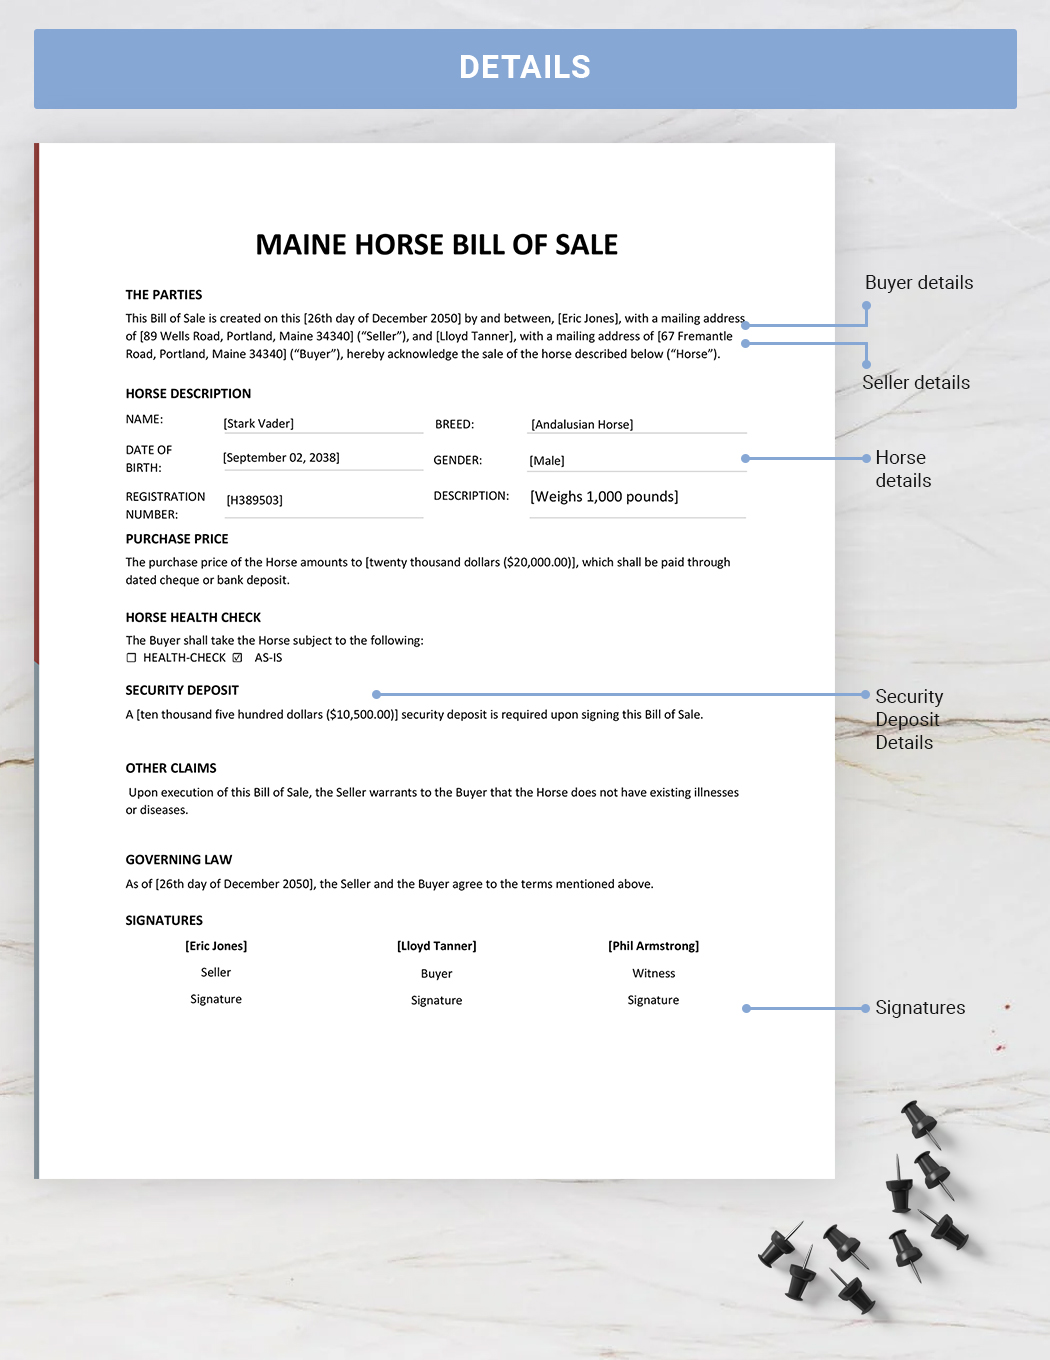 Maine Horse Bill of Sale Form Template